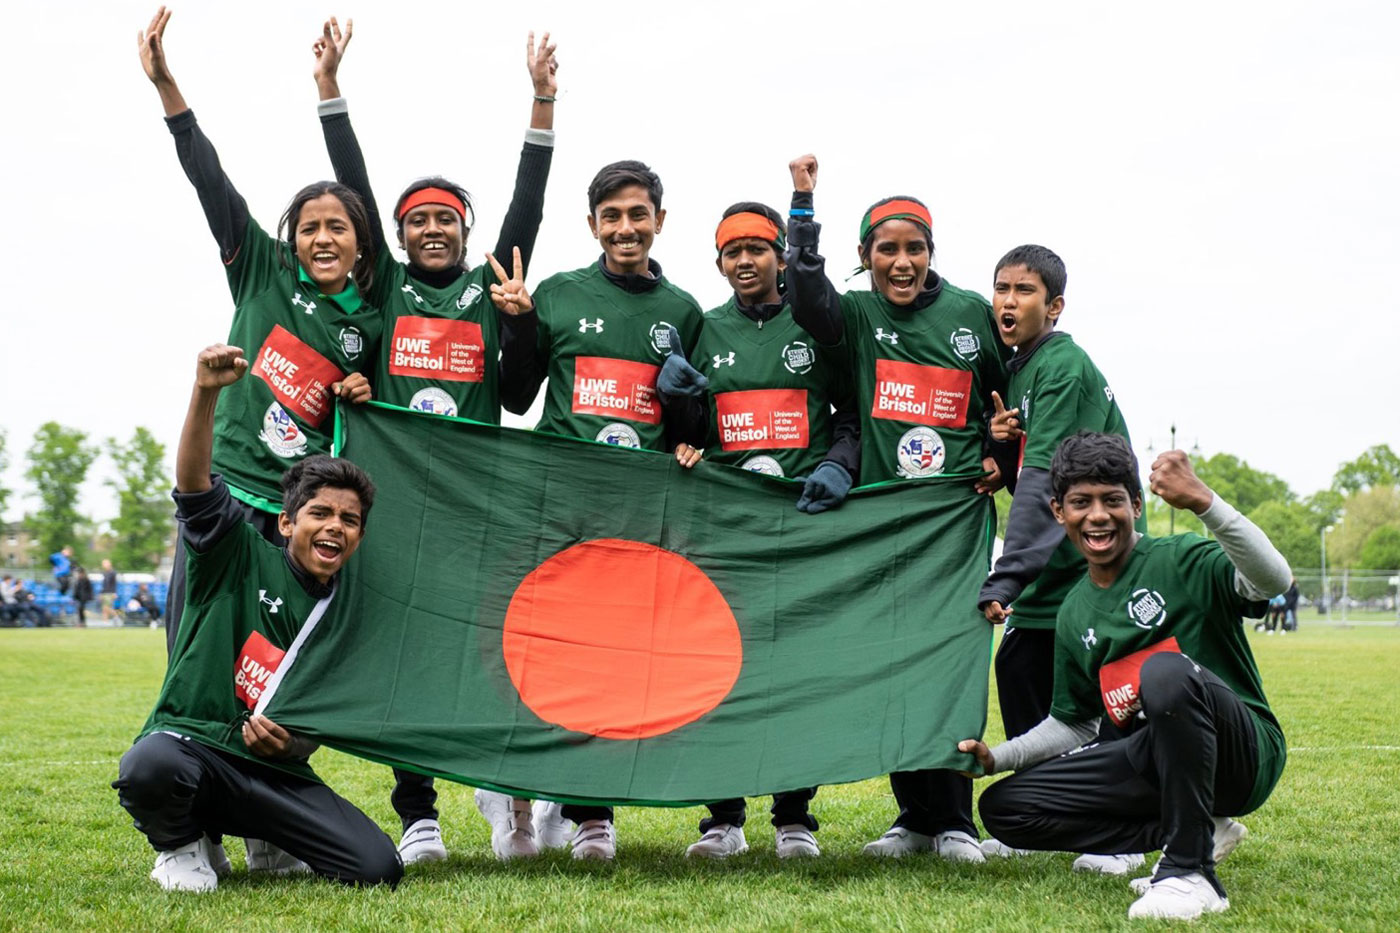 LEEDO's Street Child Cricket World Cup team members stand outside holding the flag of Bangladesh and raising their hands in victory. © LEEDO